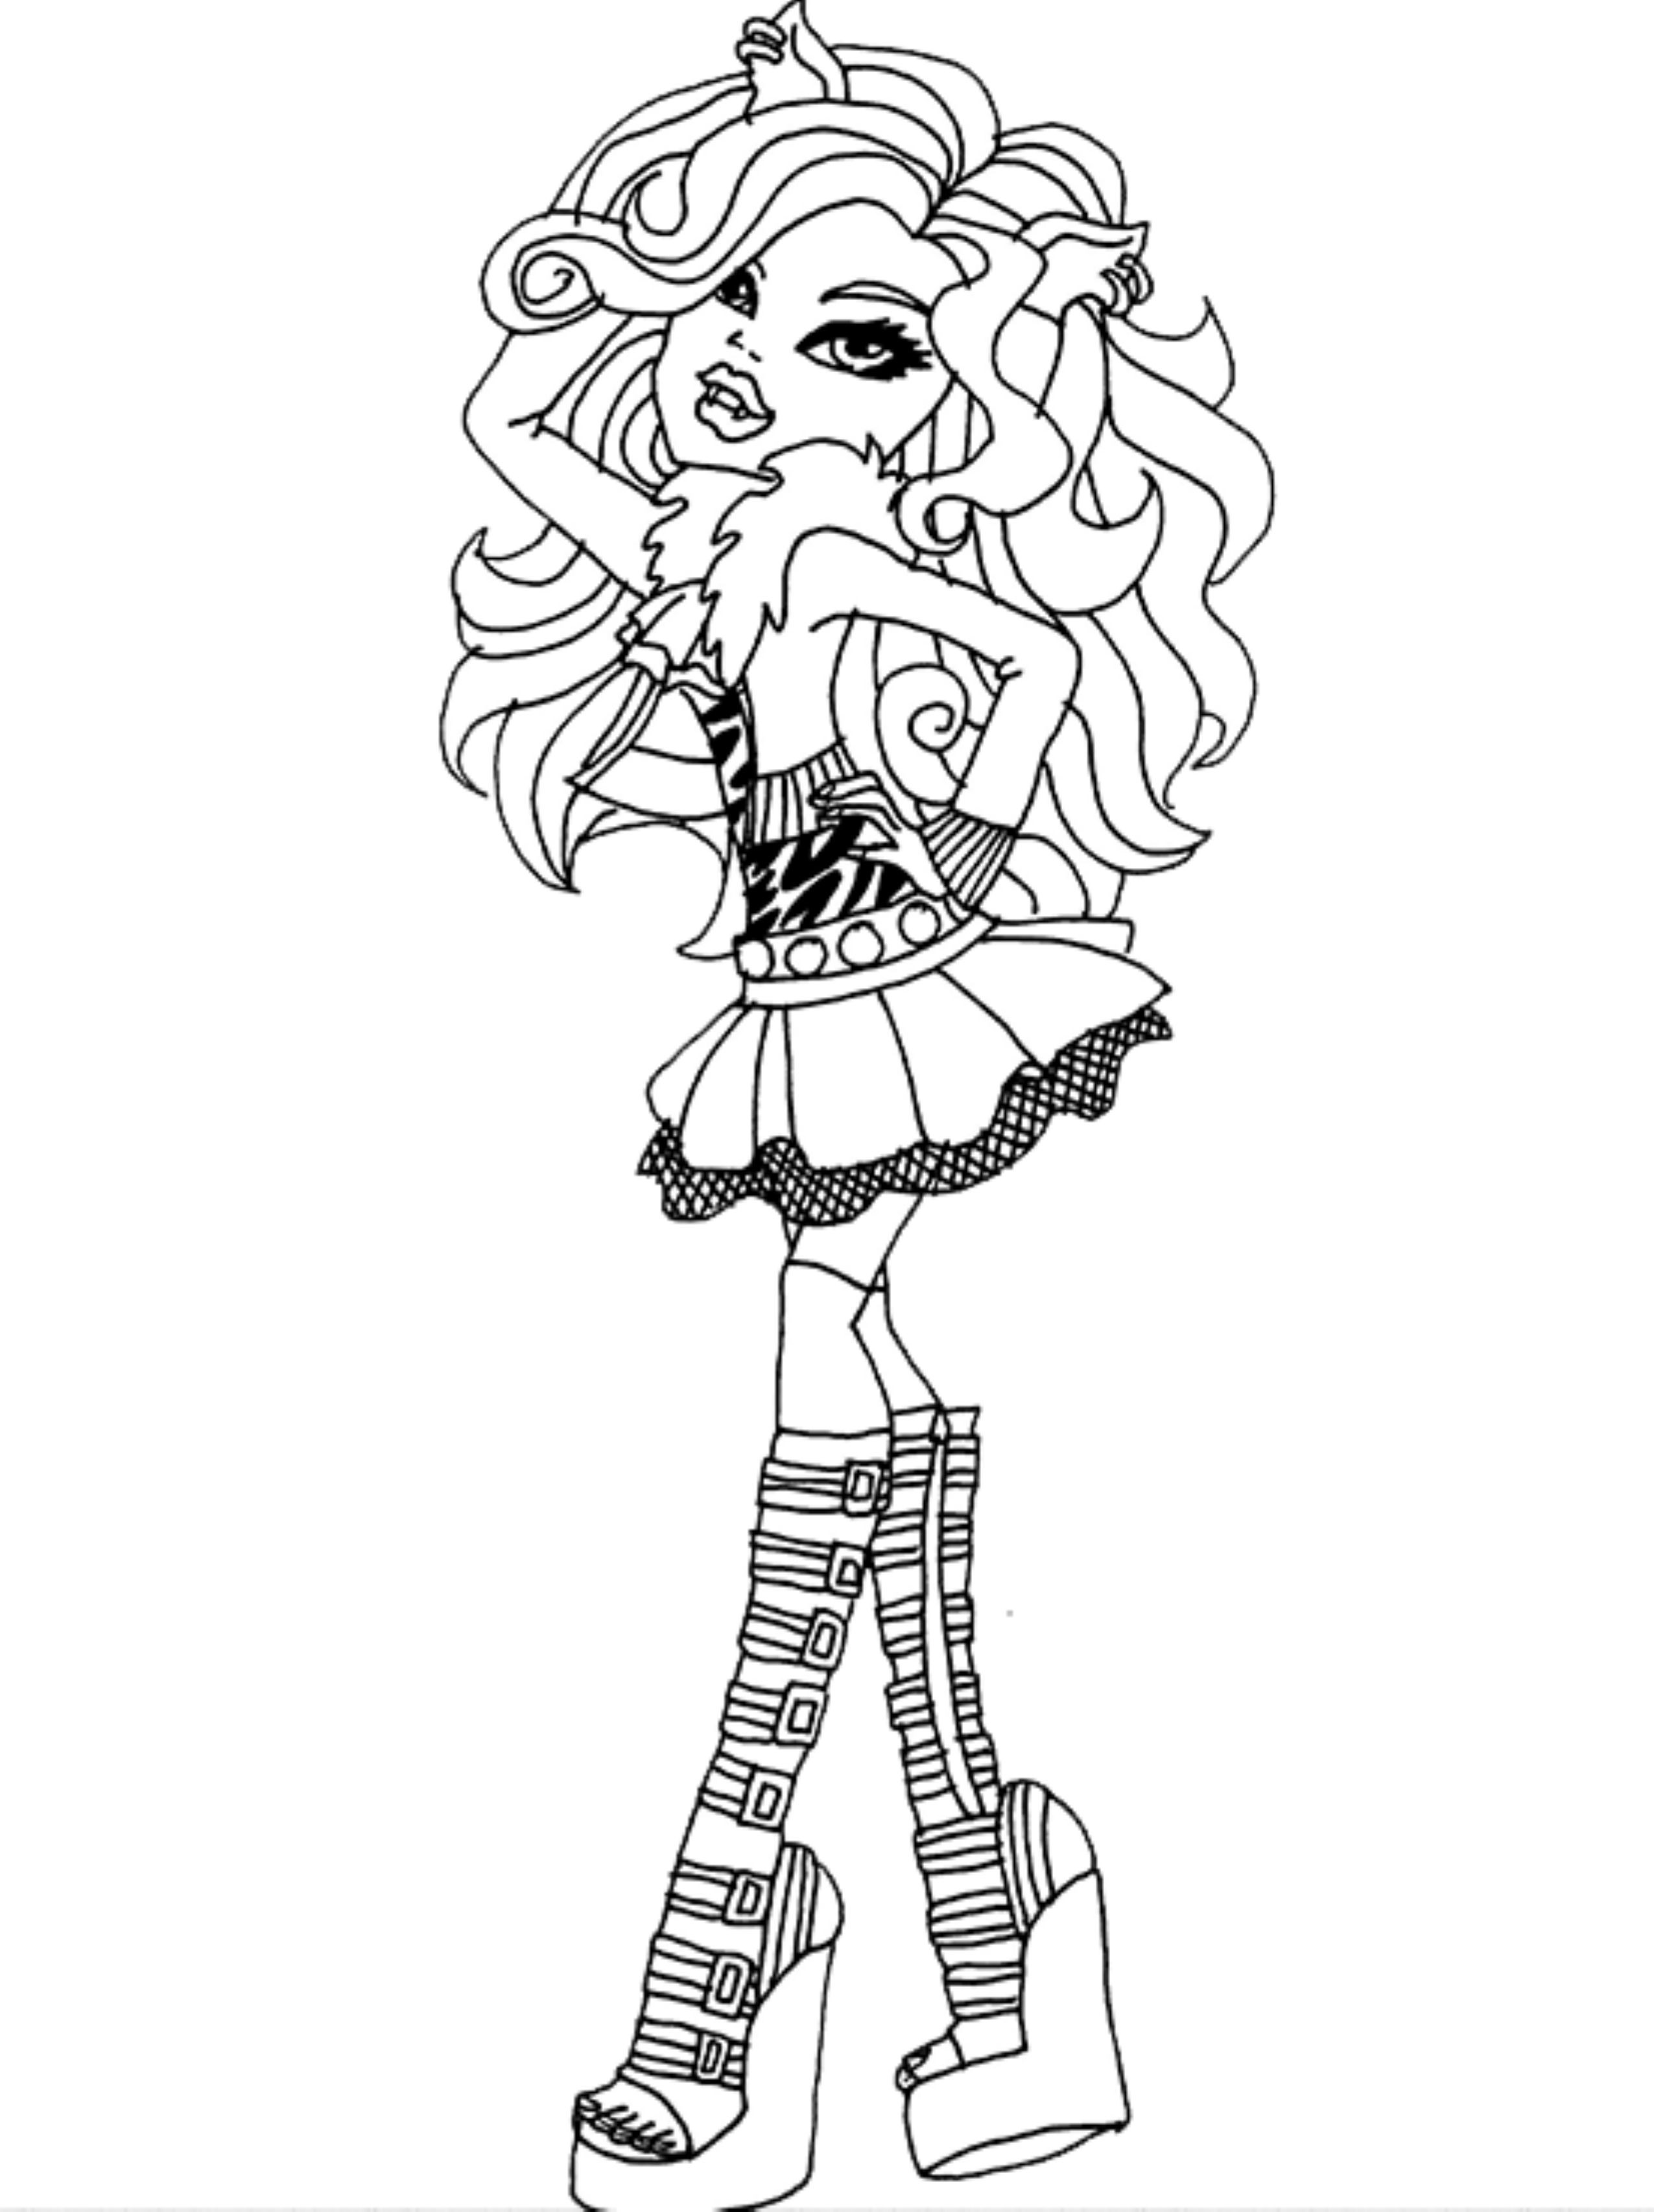 monster high coloring pages clawdeen wolf monster high clawdeen wolf drawing at getdrawingscom clawdeen high pages monster wolf coloring 